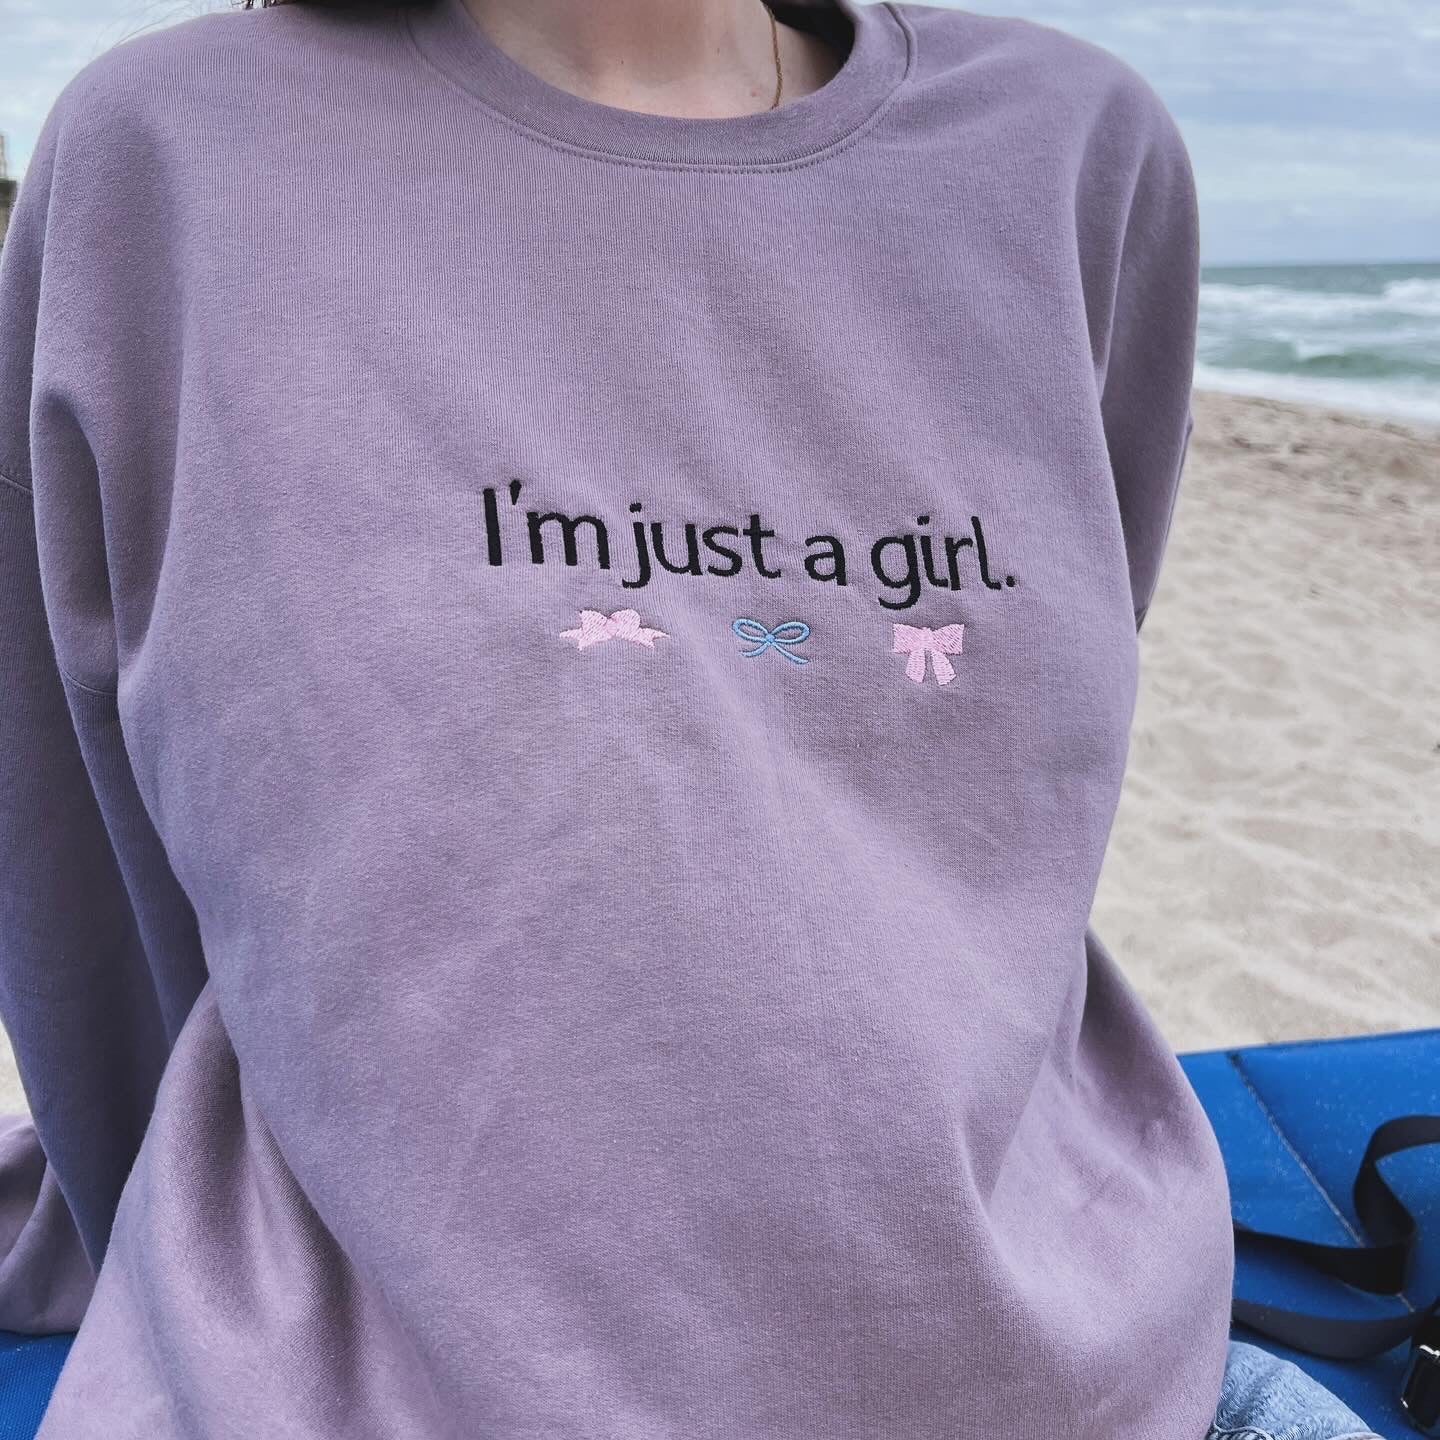 a woman sitting on the beach wearing a sweatshirt that says i'm just a